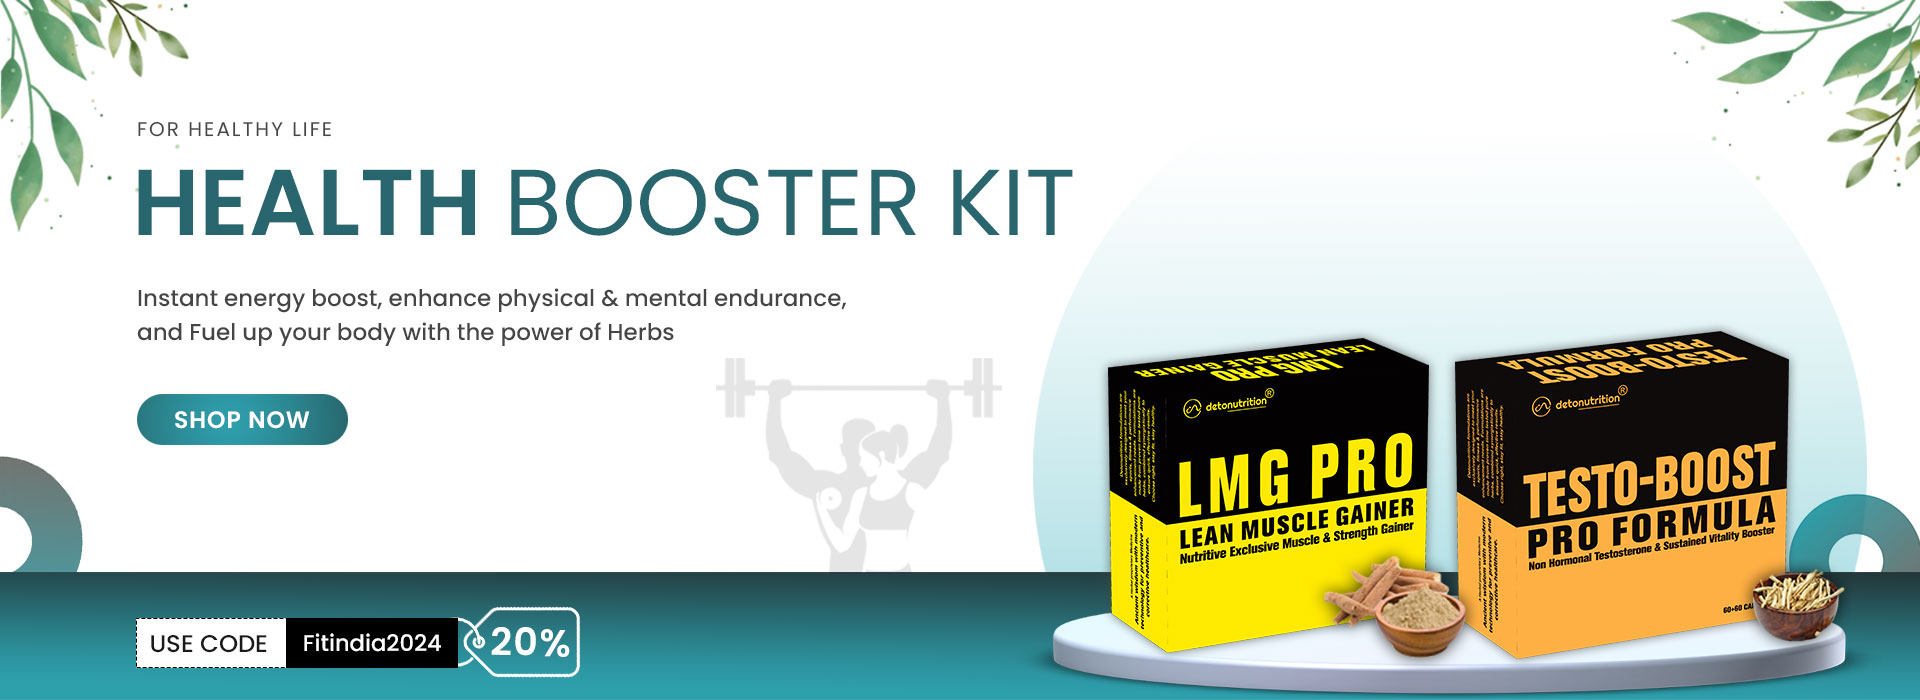 Health booster kit